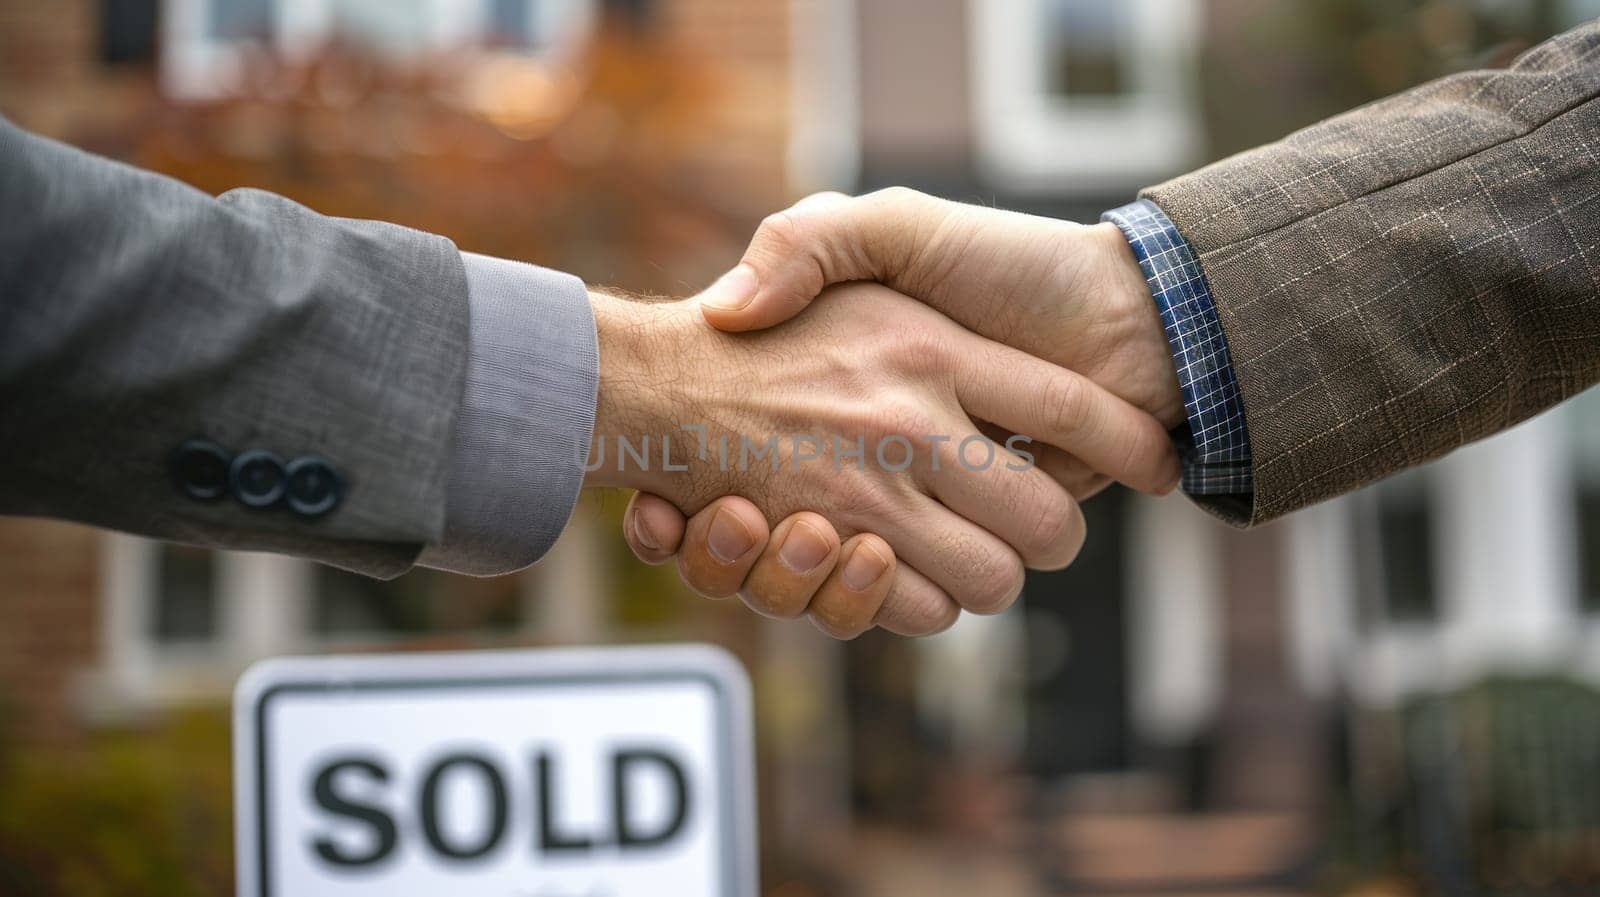 Two men shaking hands over a signed document that says Sold.